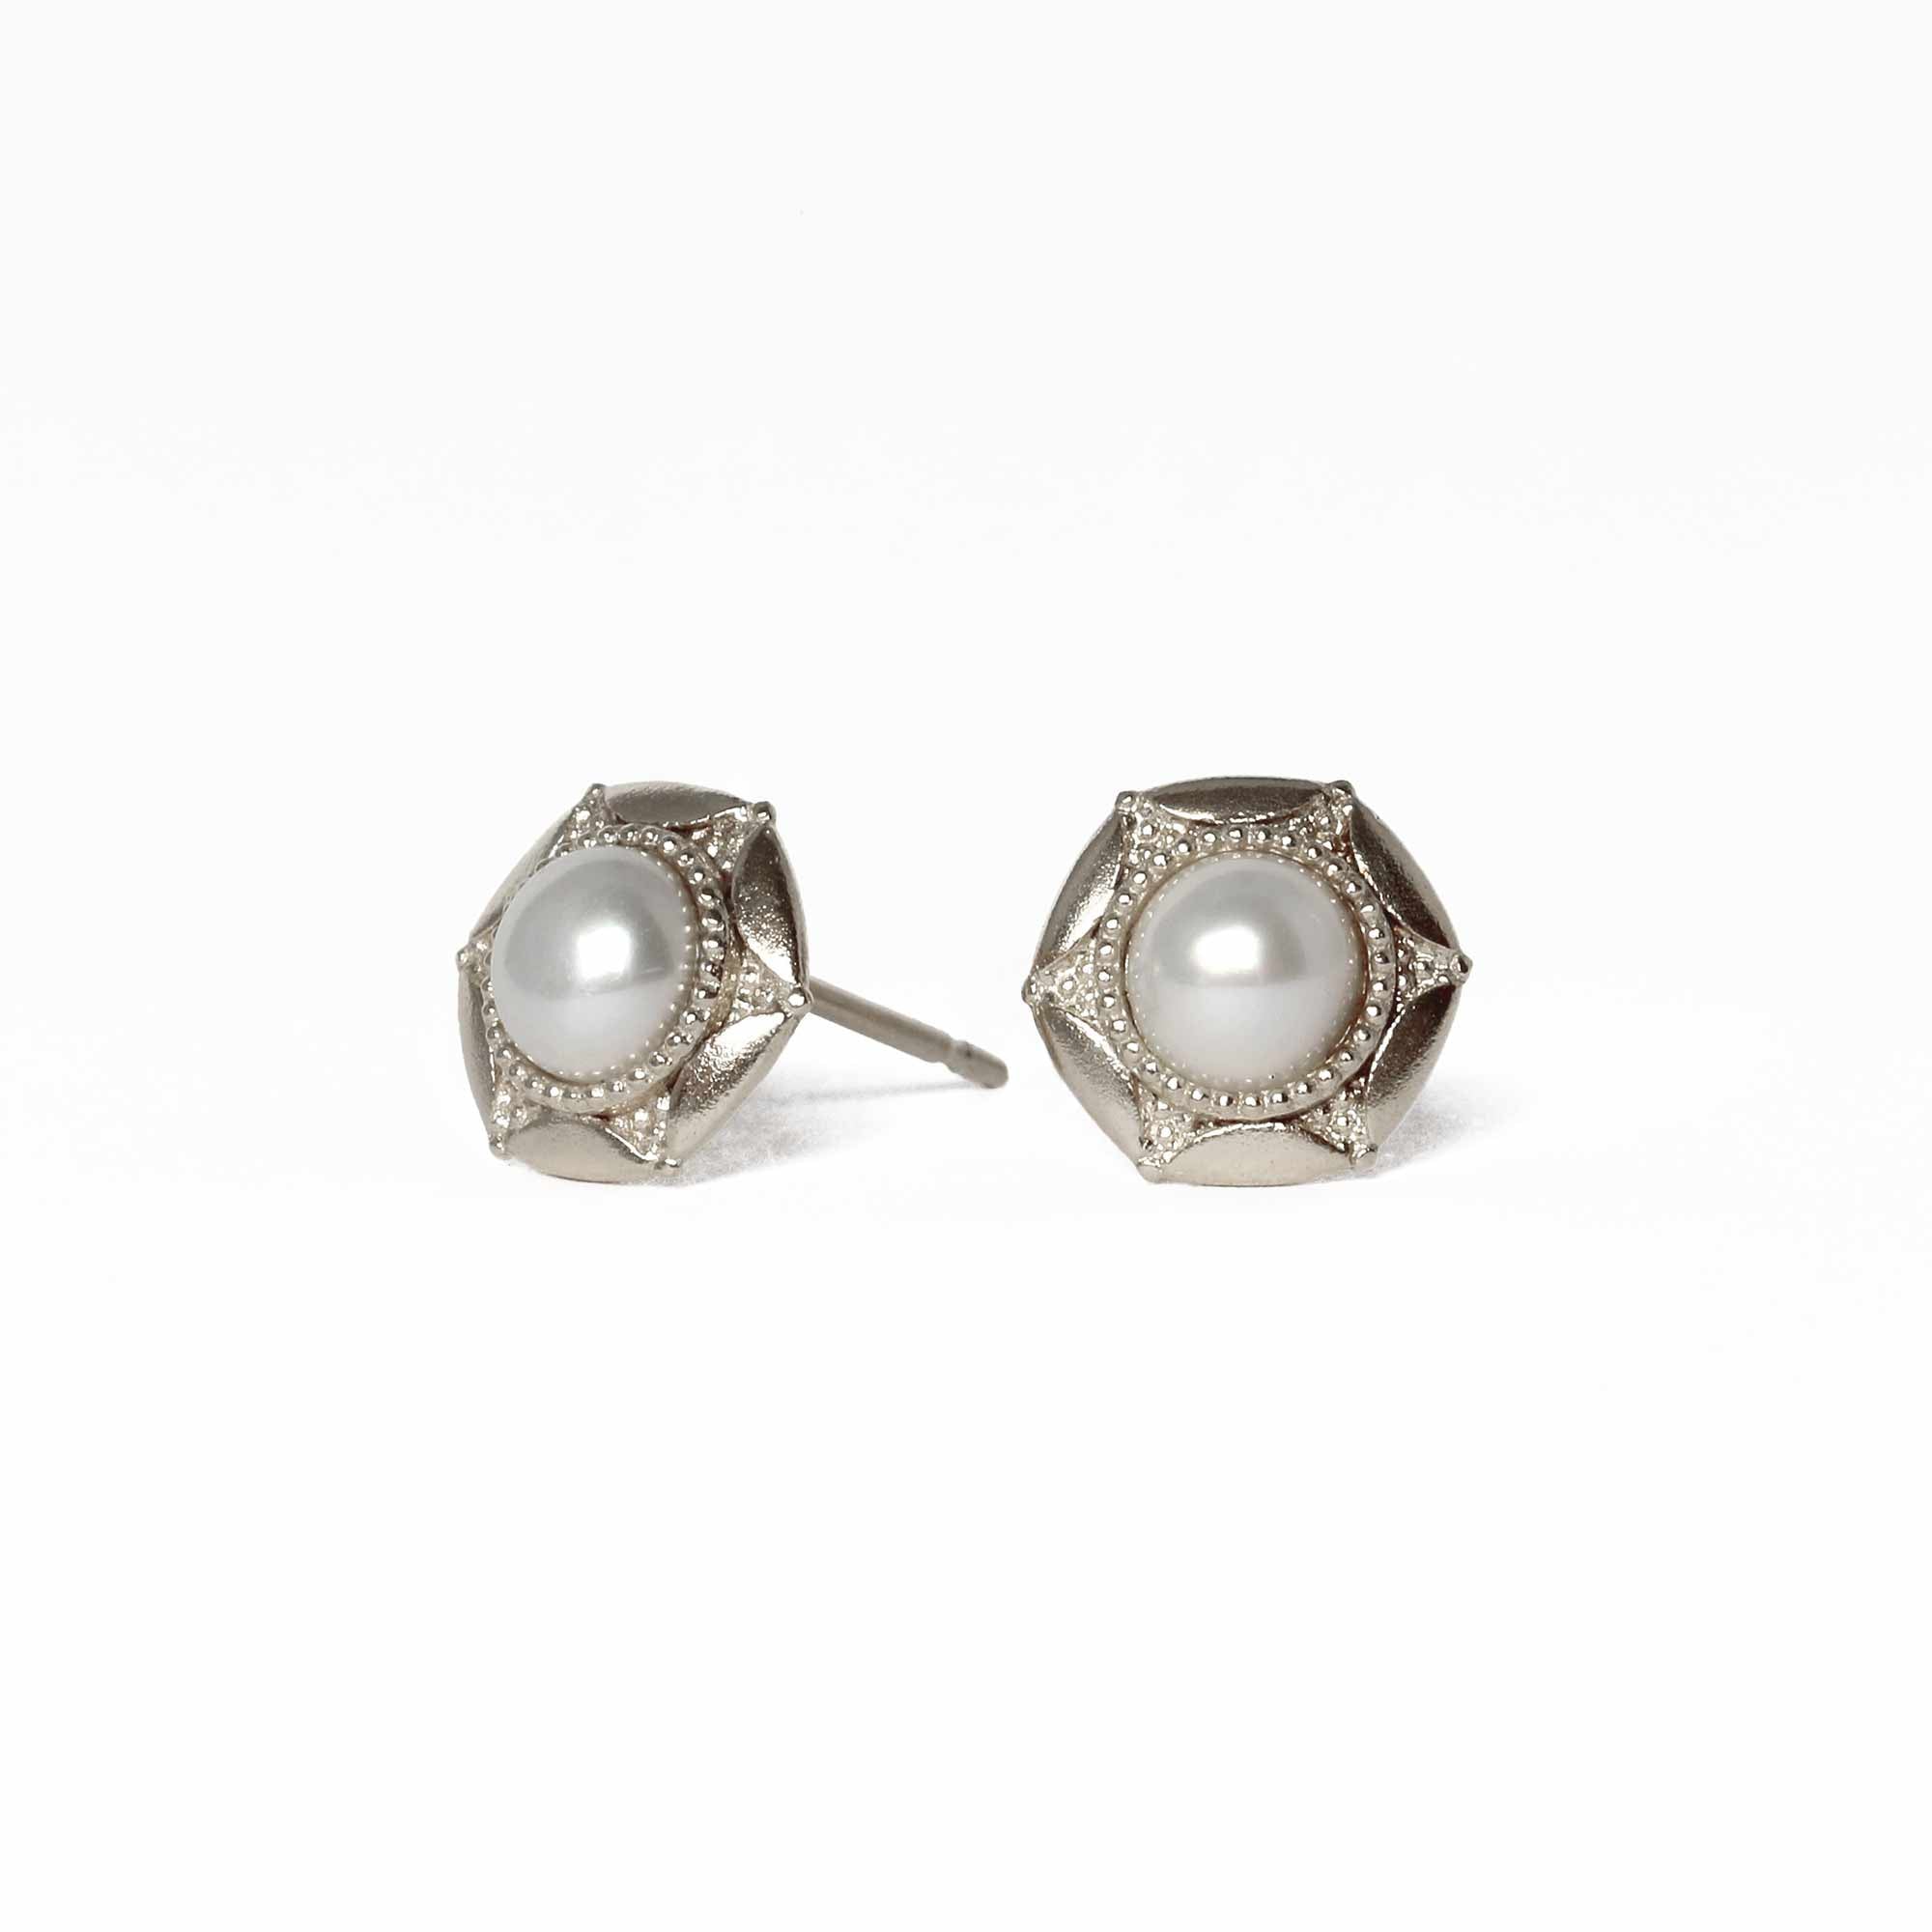 Statement textured silver pearl earrings, inspired by the moon. product shot on white background